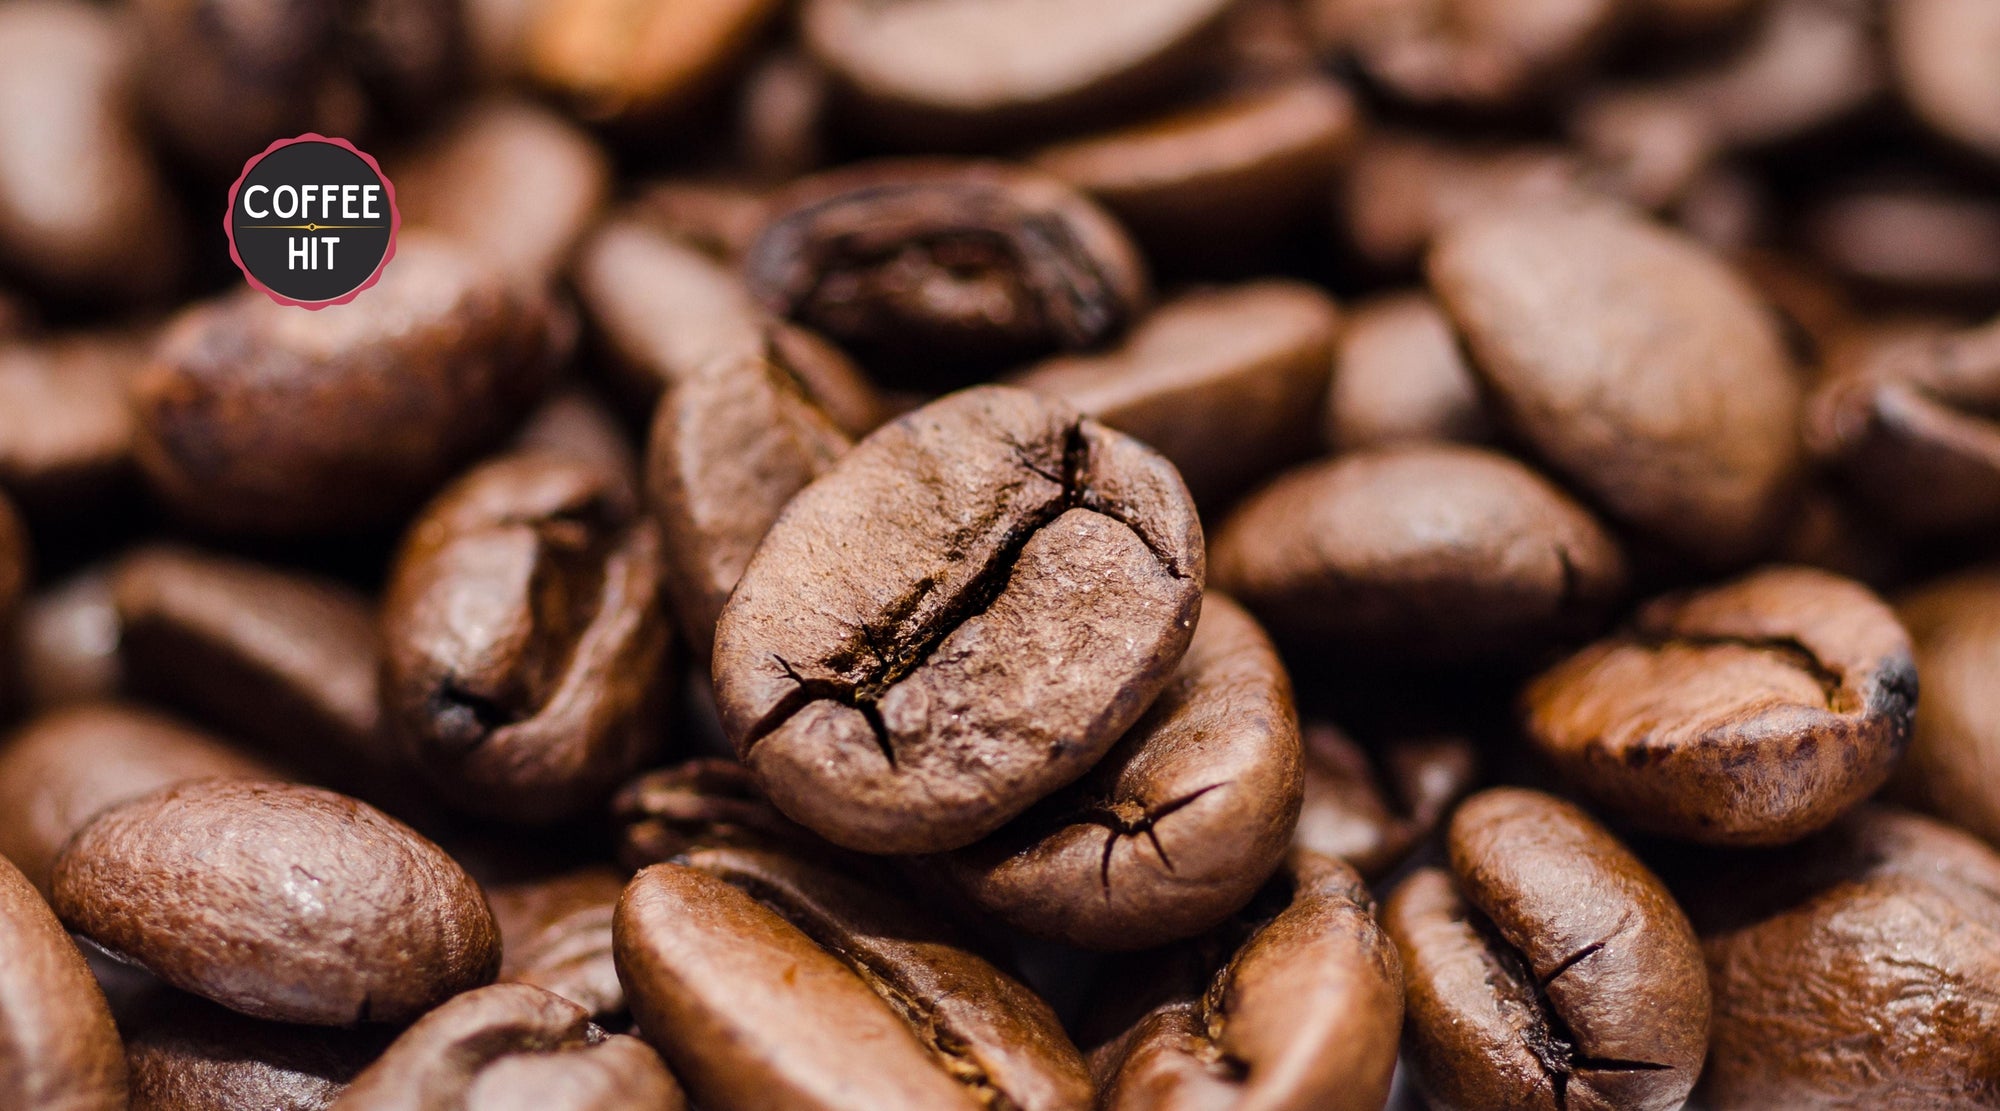 Coffee Beans 101: The 4 Most Popular Beans Explained - Coffee Hit